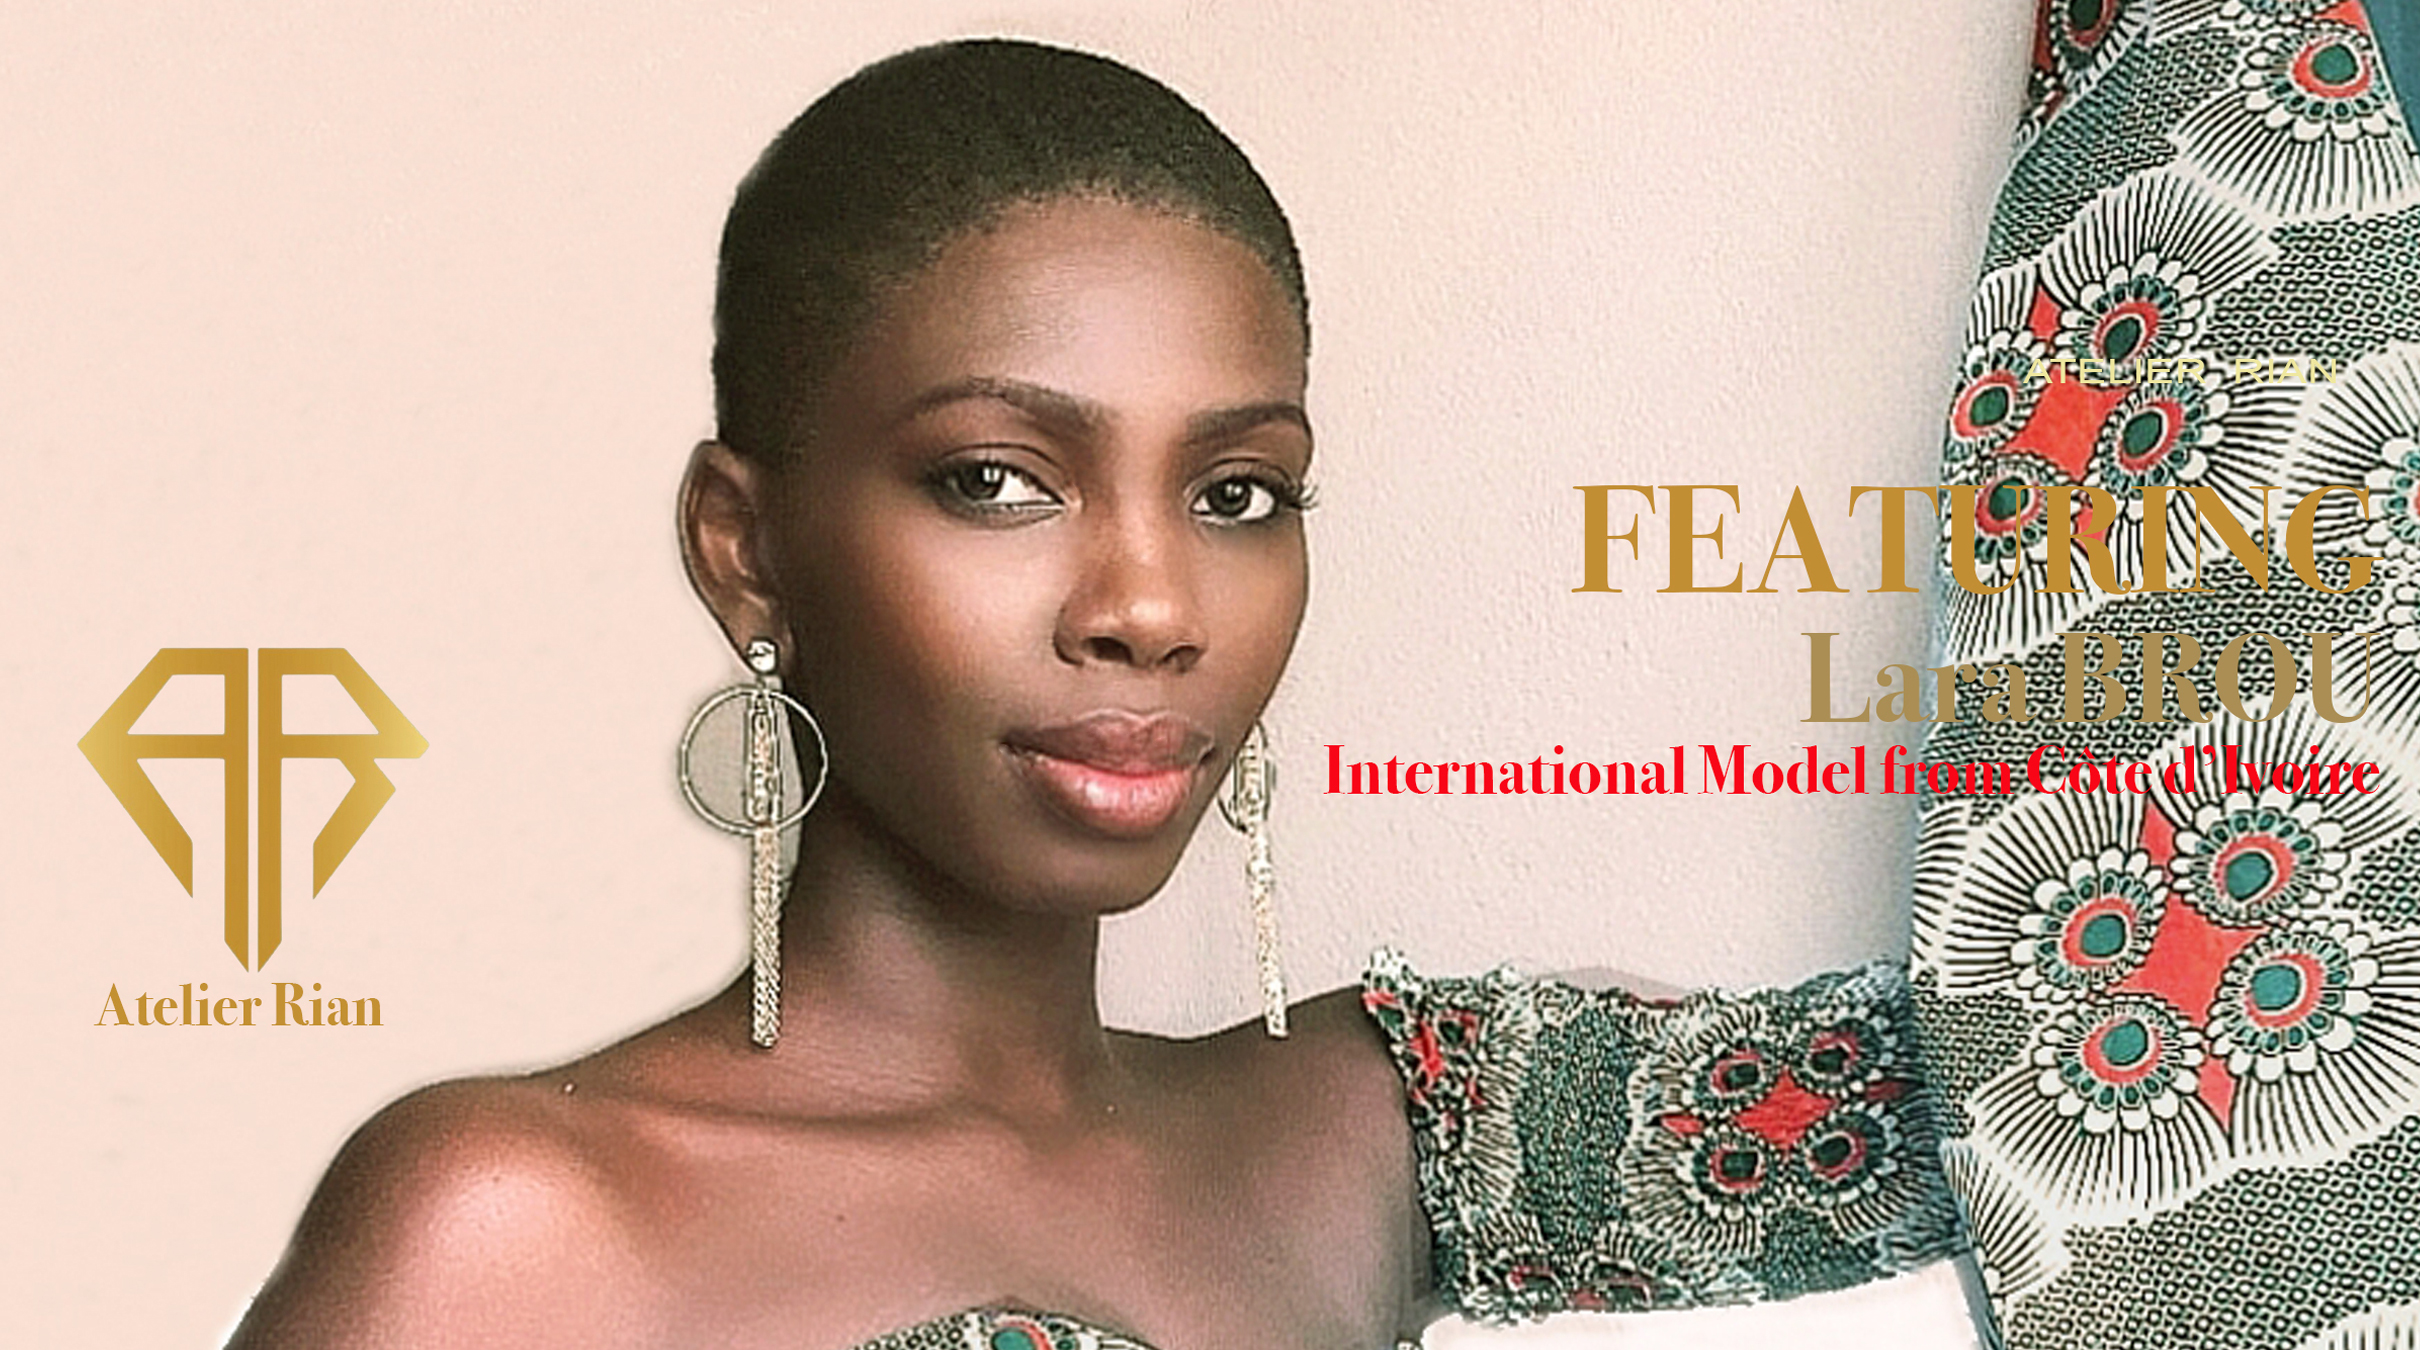 AFRICA-VOGUE-COVER-AFRICA-FASHION-STYLE-2490X3508-DN-AFRICA-COVER-NUMBER-45-FEBRUARY-11TH-2019-LARA-BROU-INTERNATIONAL-MODEL-FROM-COTE-D’IVOIRE-DN-AFRICA-Media-Partner